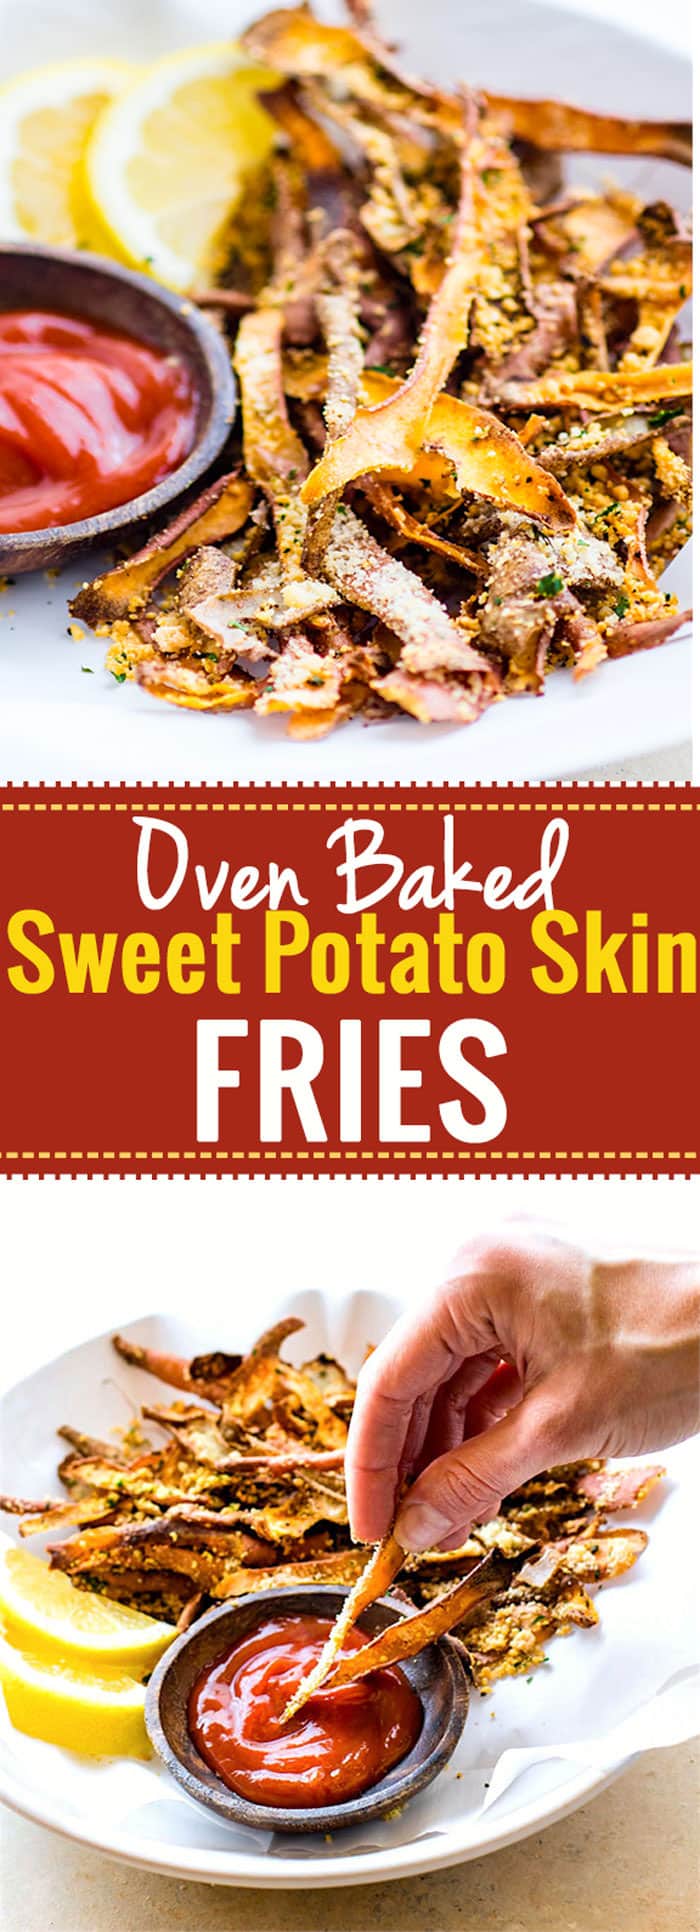 Healthy Oven Baked Parmesan Sweet Potato Skin Fries! Super simple oven baked sweet potato skin fries made from leftover potato skin peels. Easy to make with ANY root vegetable and paleo friendly. @cottercrunch